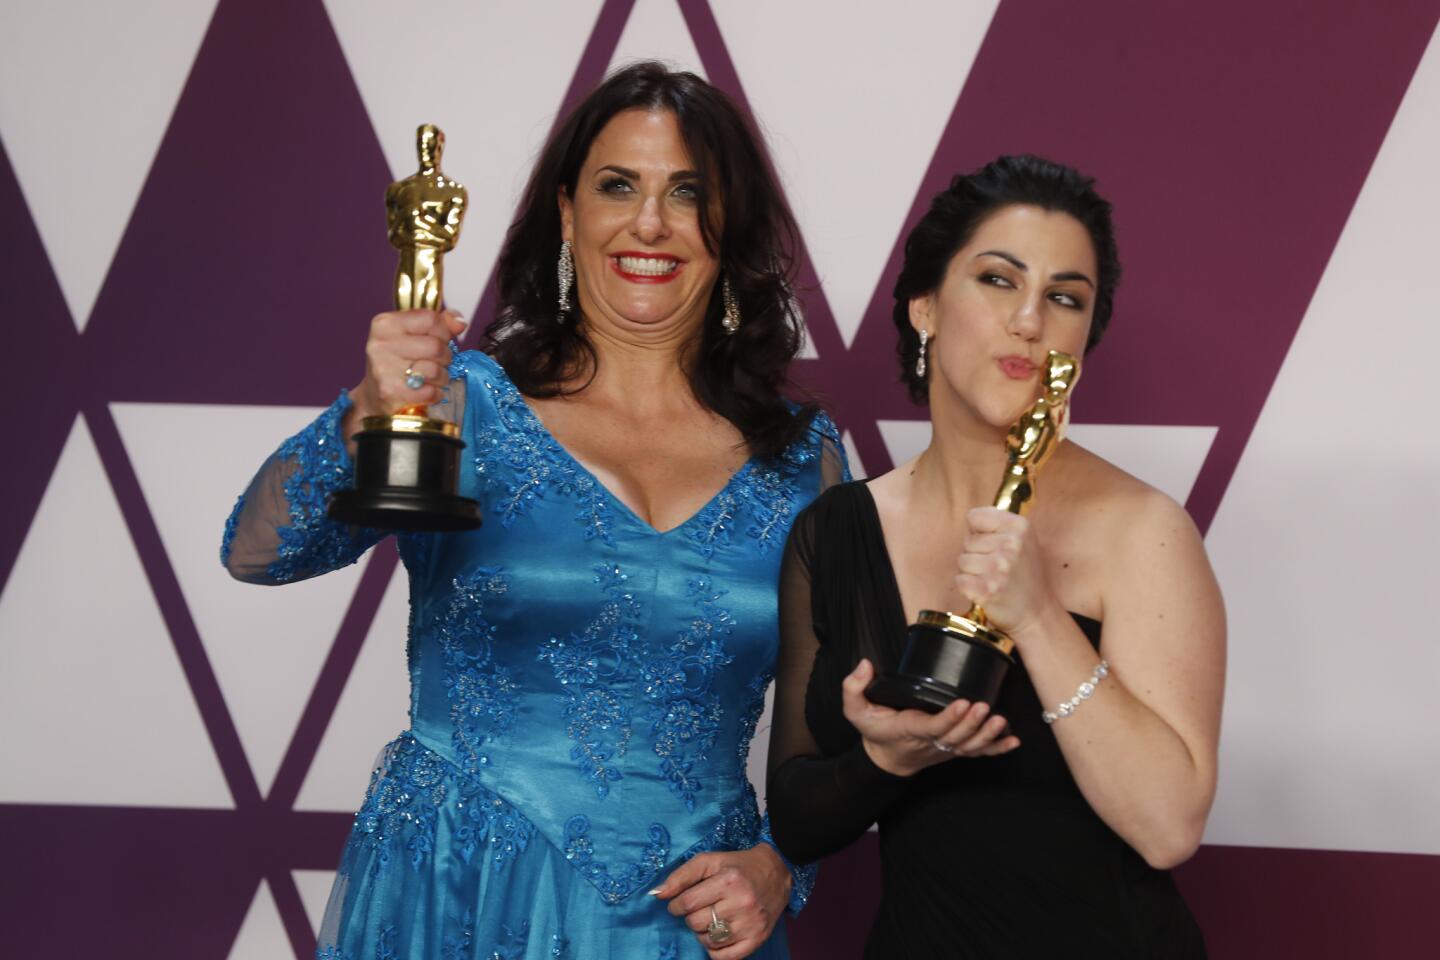 Melissa Berton, left, and Rayka Zehtabchi, winners of the live action short film award for "Period. End of Sentence."